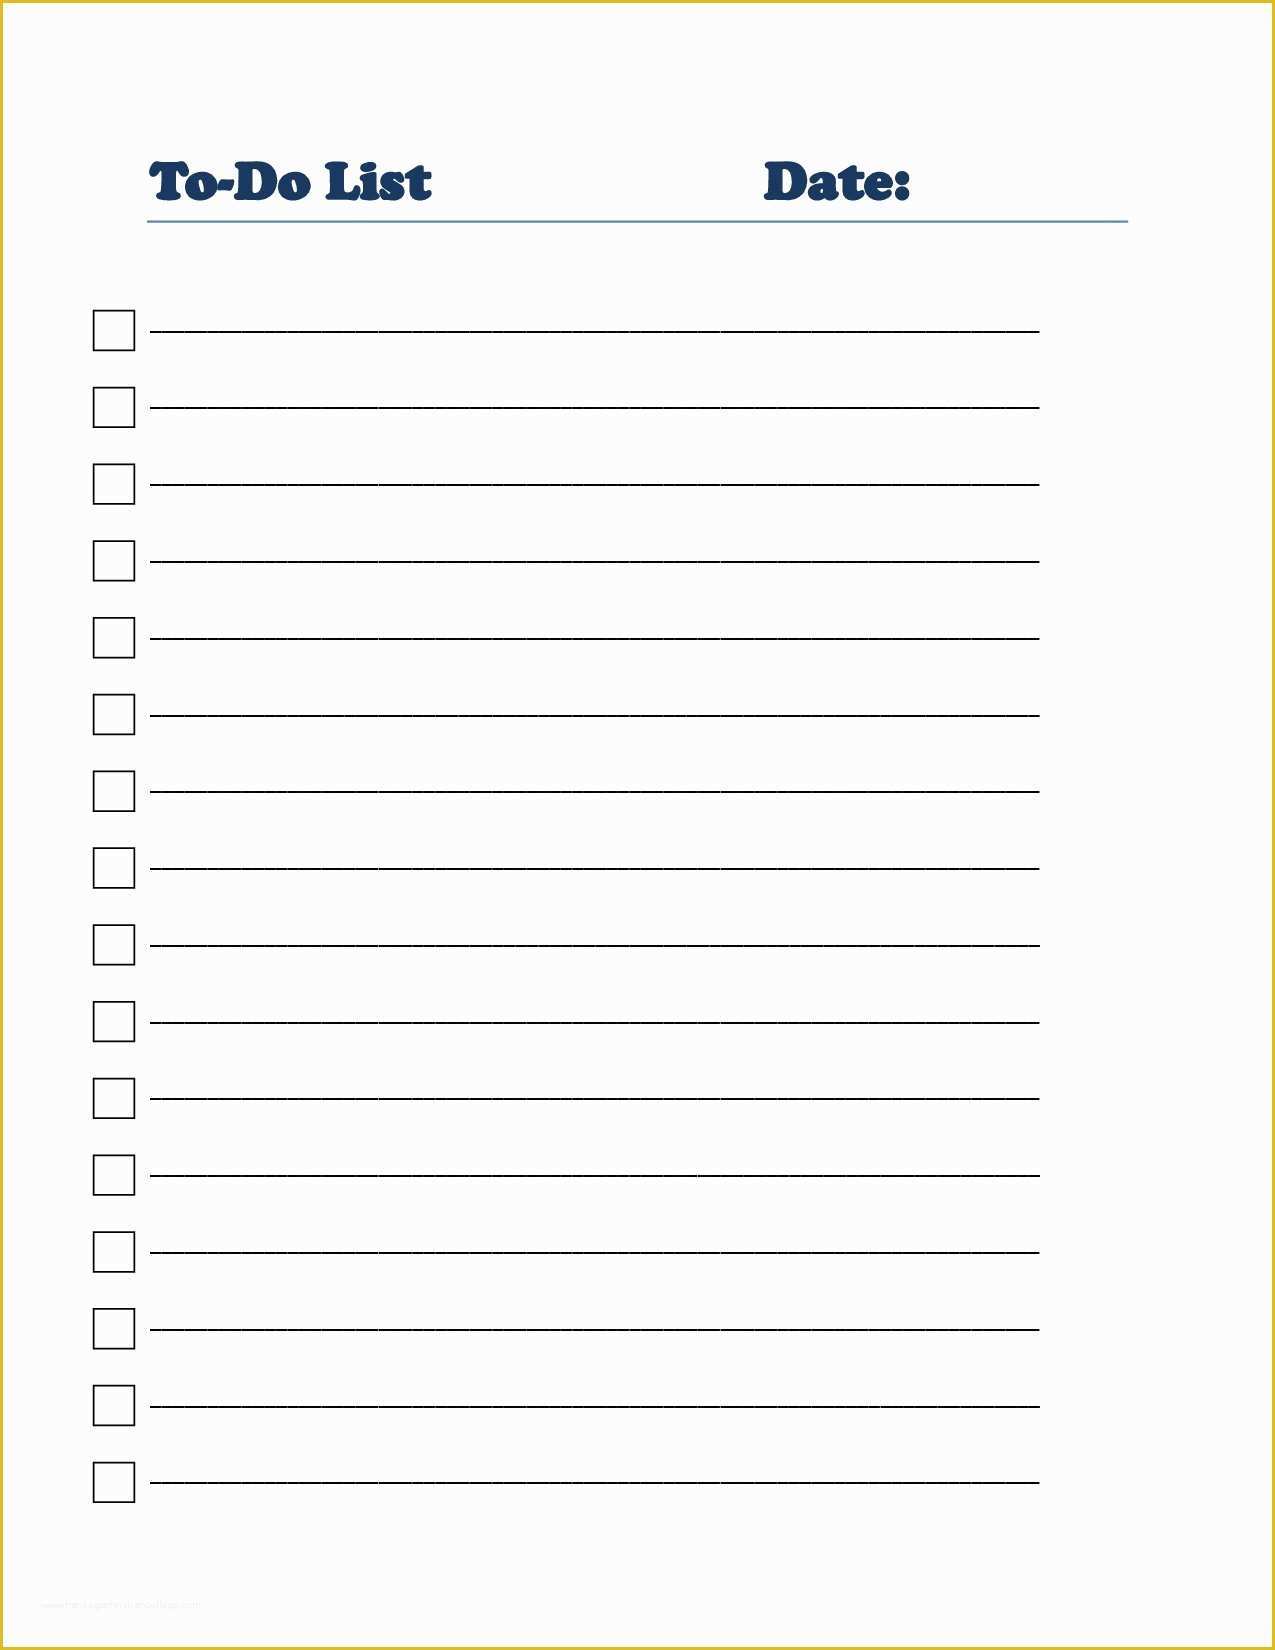 floral-to-do-list-printable-template-paper-trail-design-free